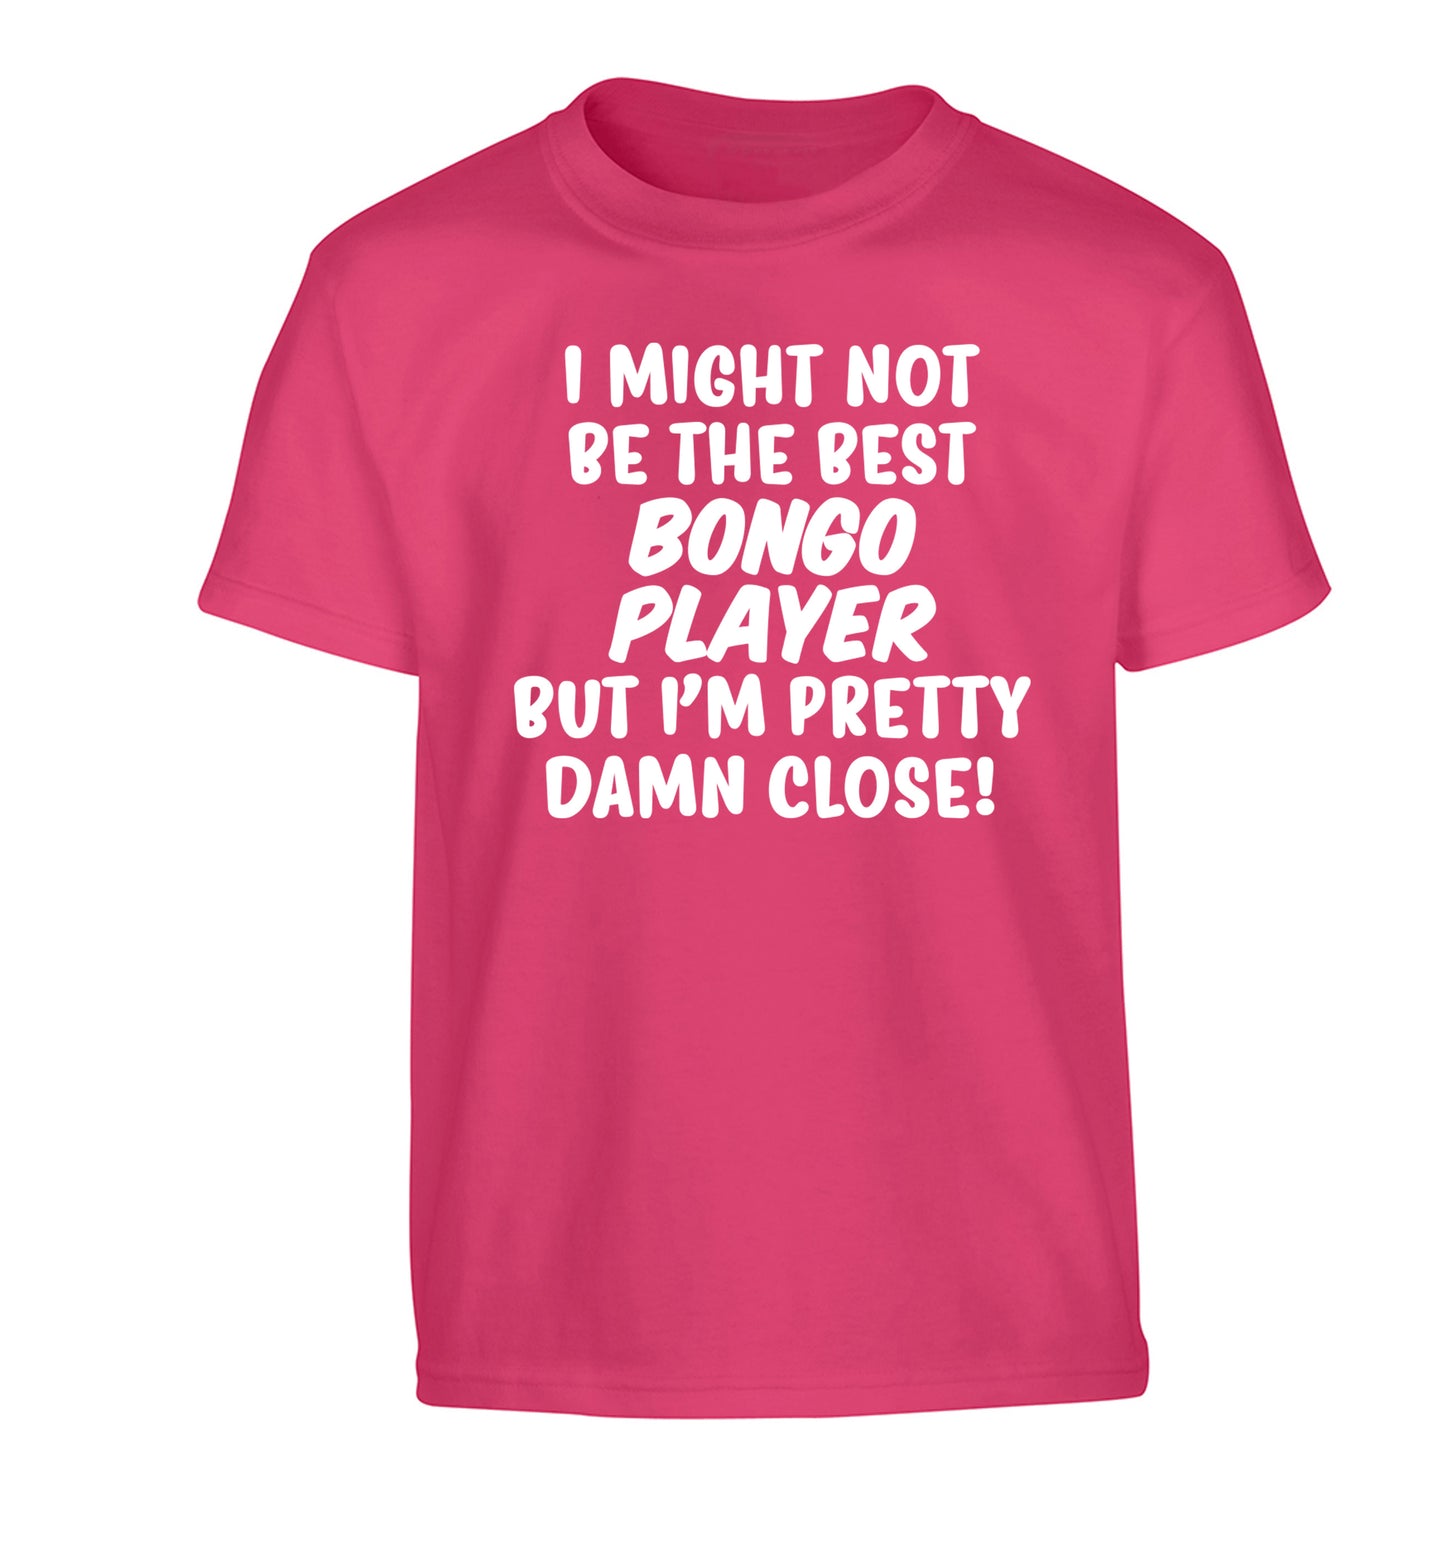 I might not be the best bongo player but I'm pretty close! Children's pink Tshirt 12-14 Years